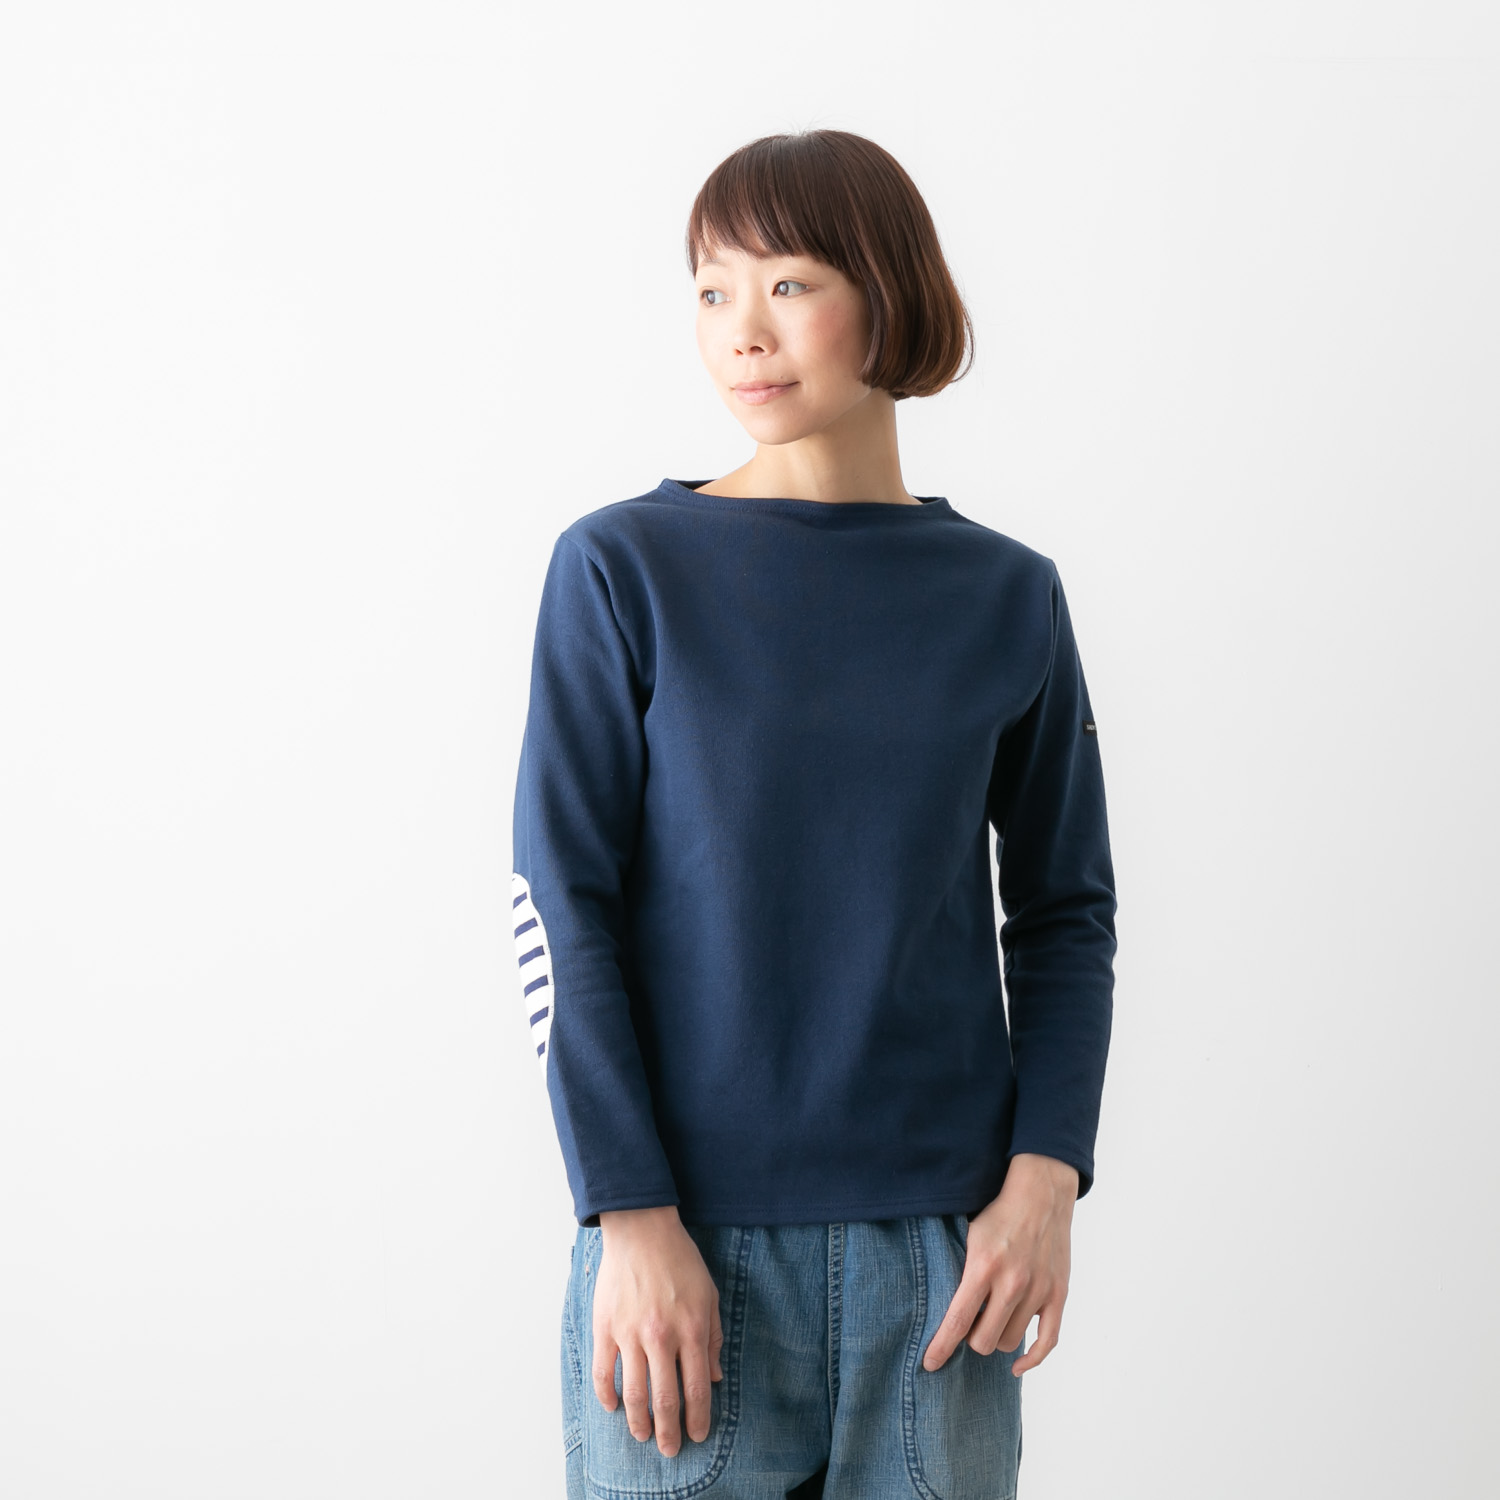 OUESSANT ウエッソン 長袖 無地 ボーダーエルボーパッチ付き ボートネックカットソー 13JC OUE.U COU.R | bluebeat  online shop